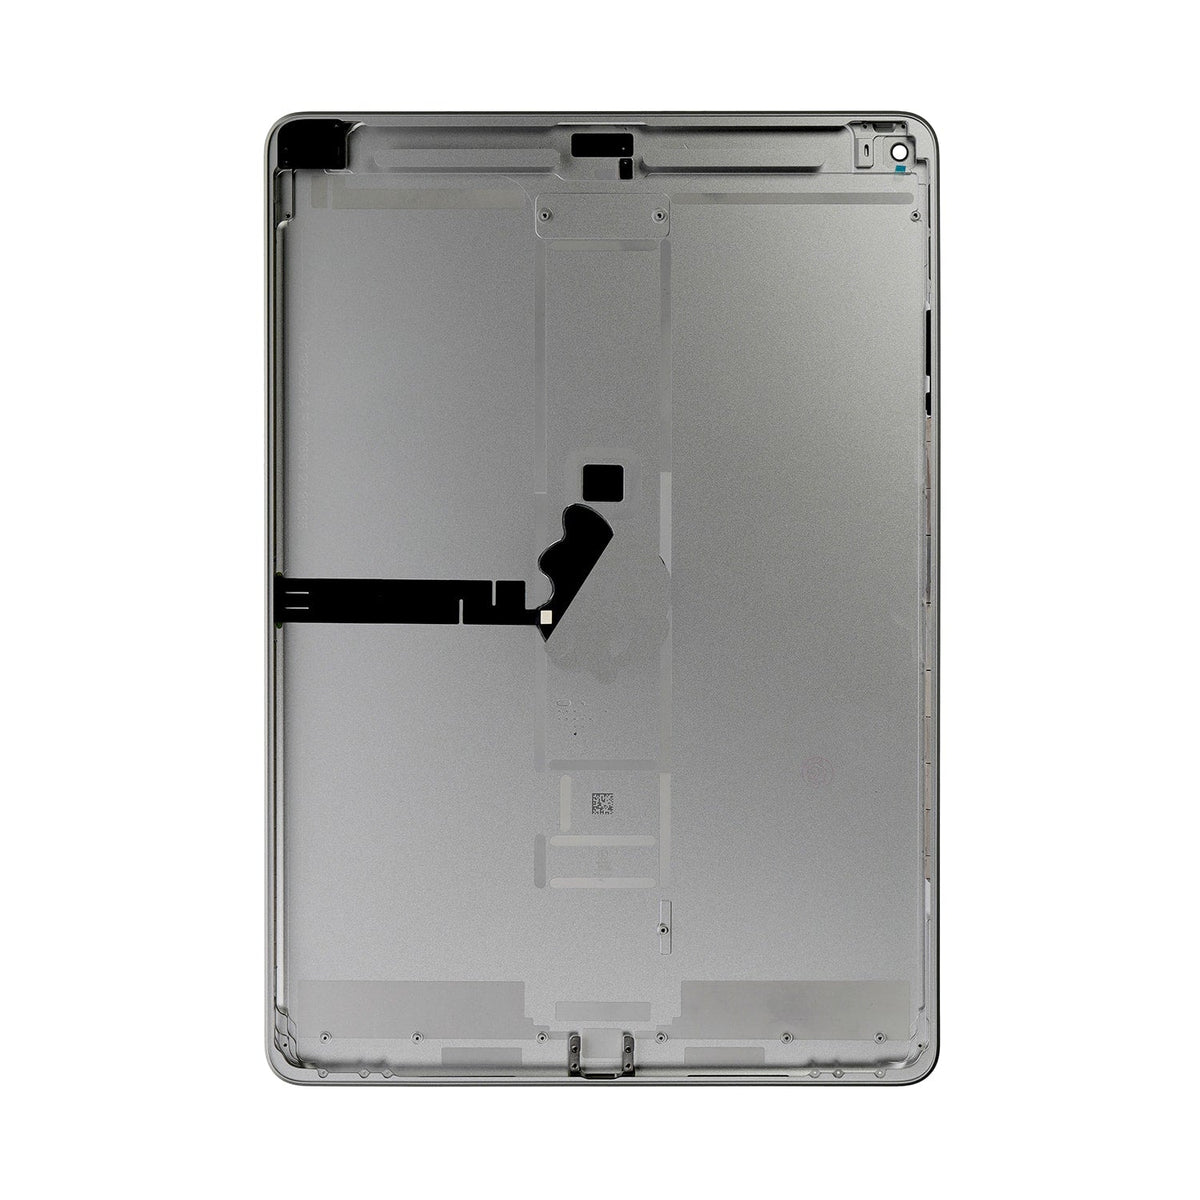 GREY WIFI VERSION BACK COVER FOR IPAD AIR 3